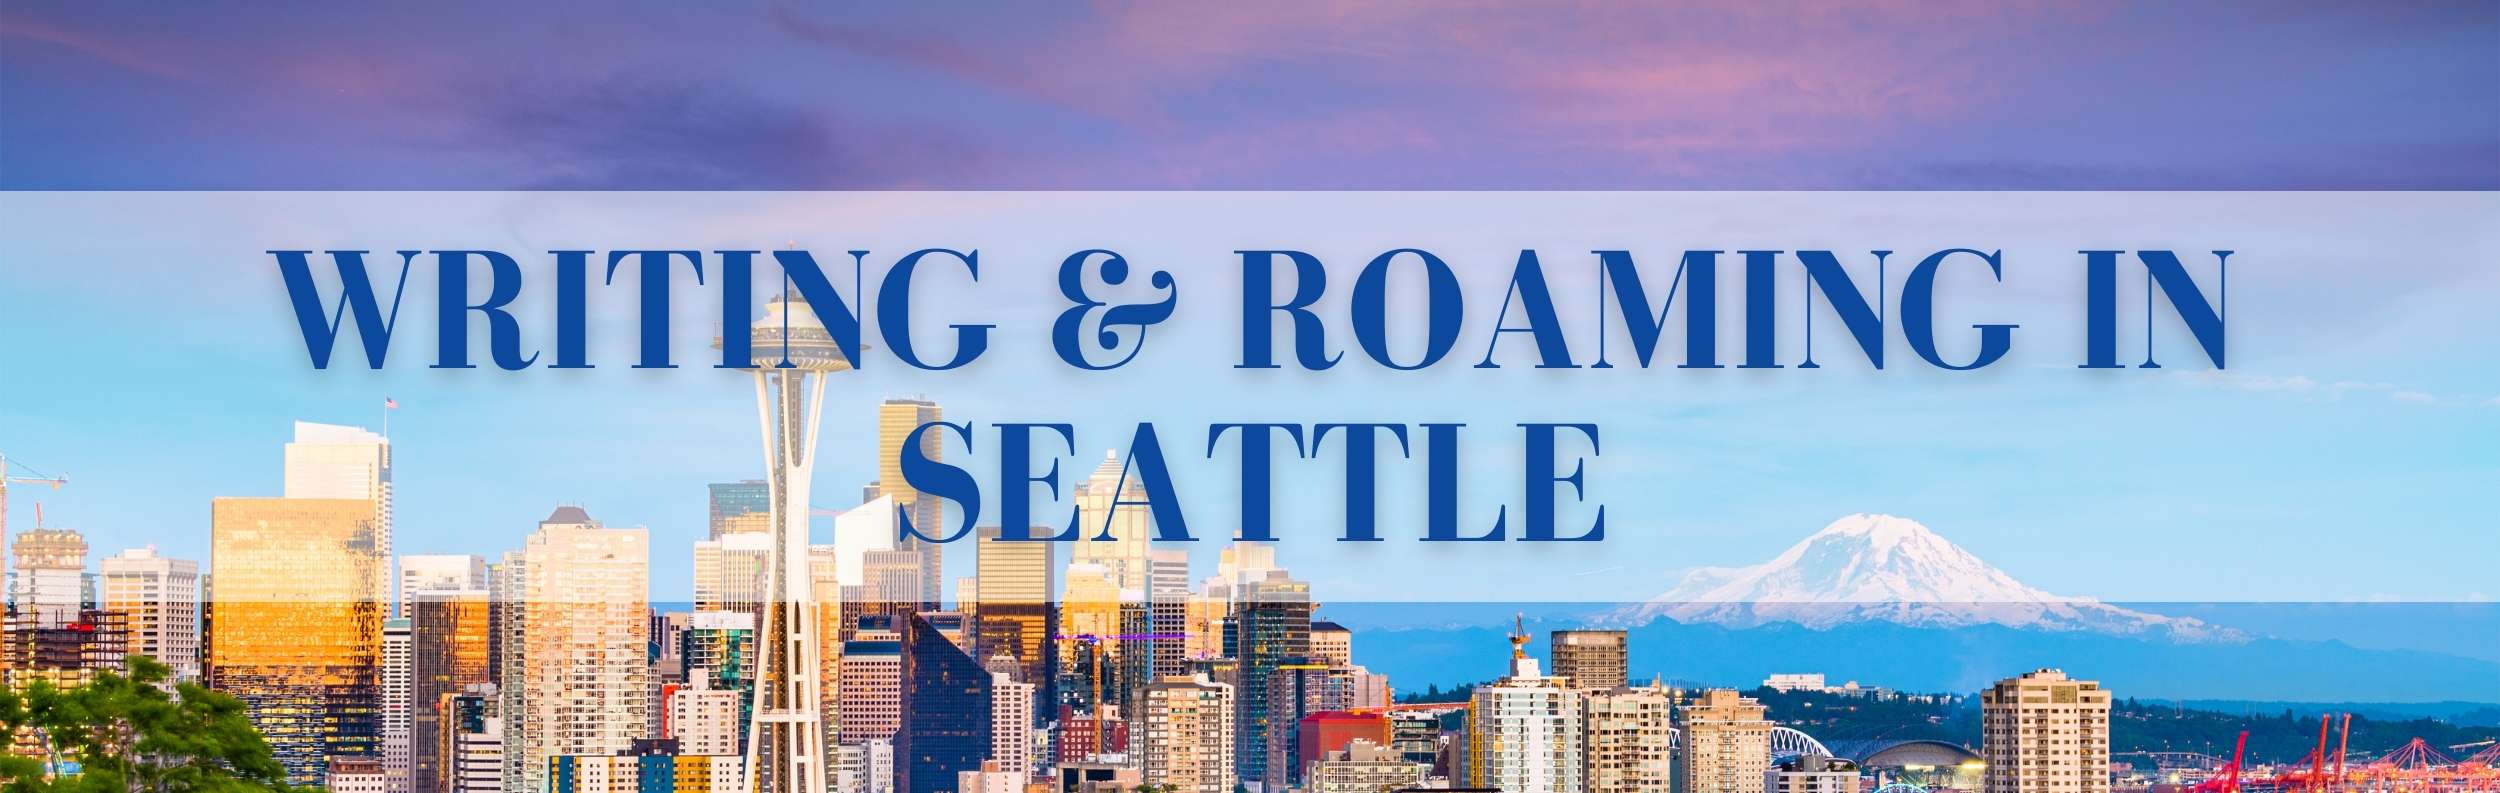 Writing and Roaming in Seattle Class